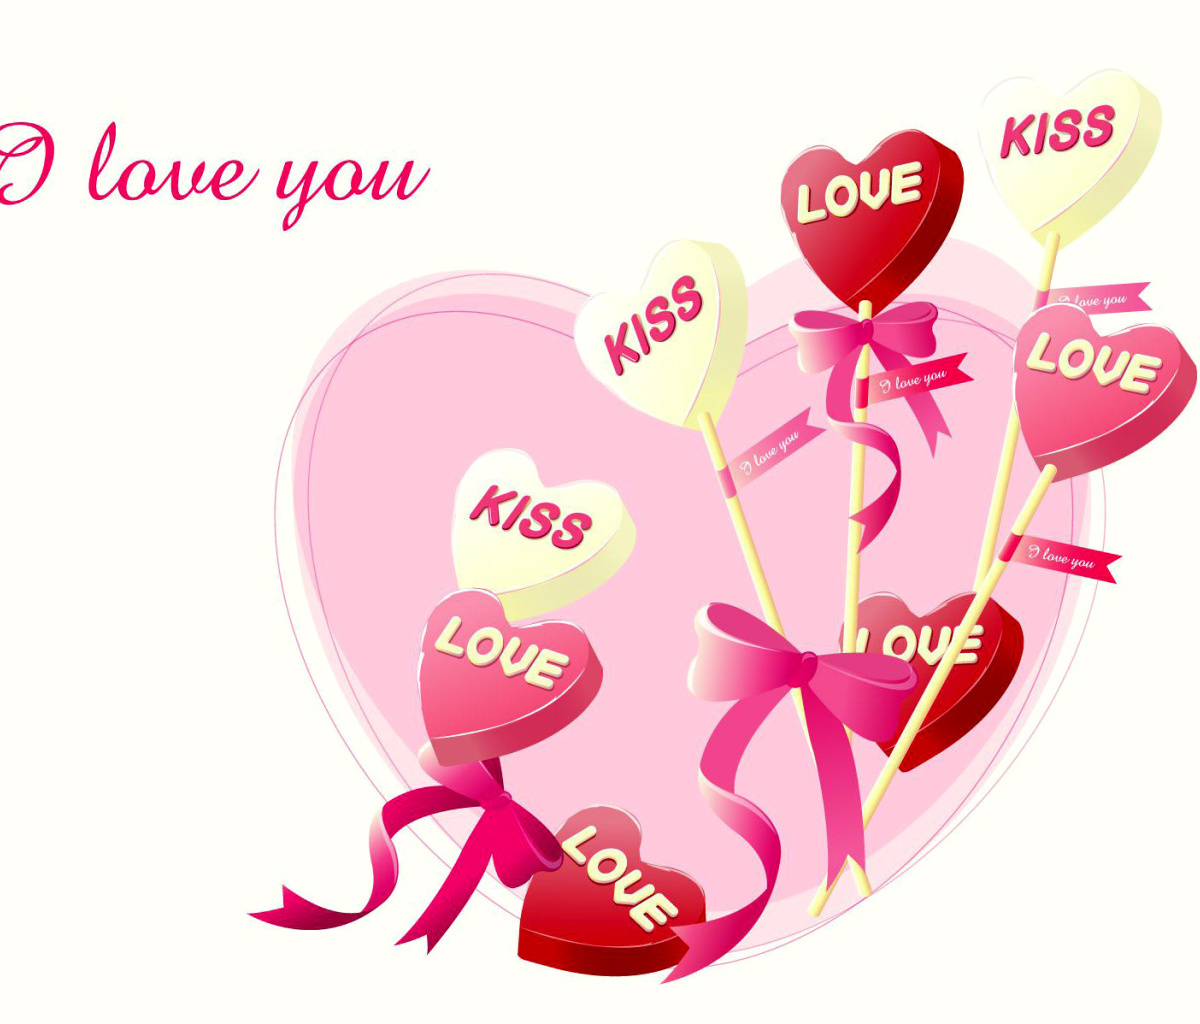 I Love You Balloons and Hearts wallpaper 1200x1024